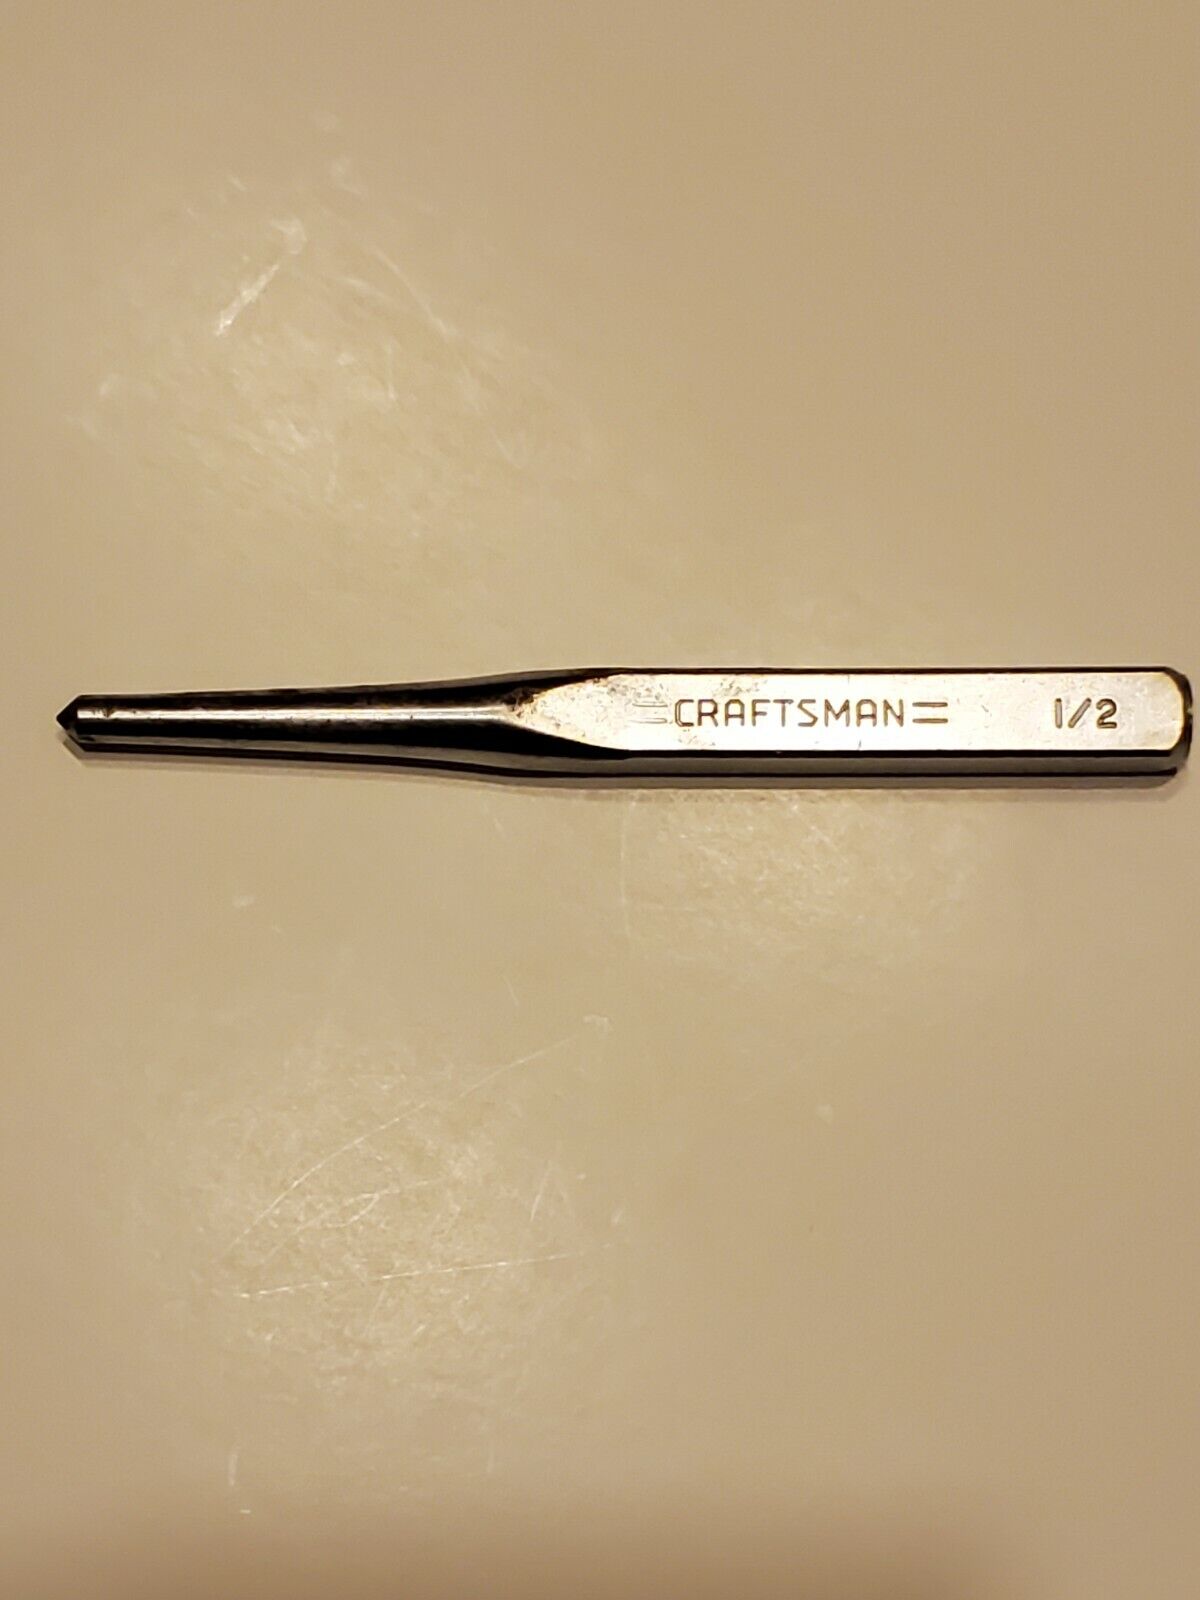 Craftsman 1//2 X 6 In Center Punch 42862 for sale online